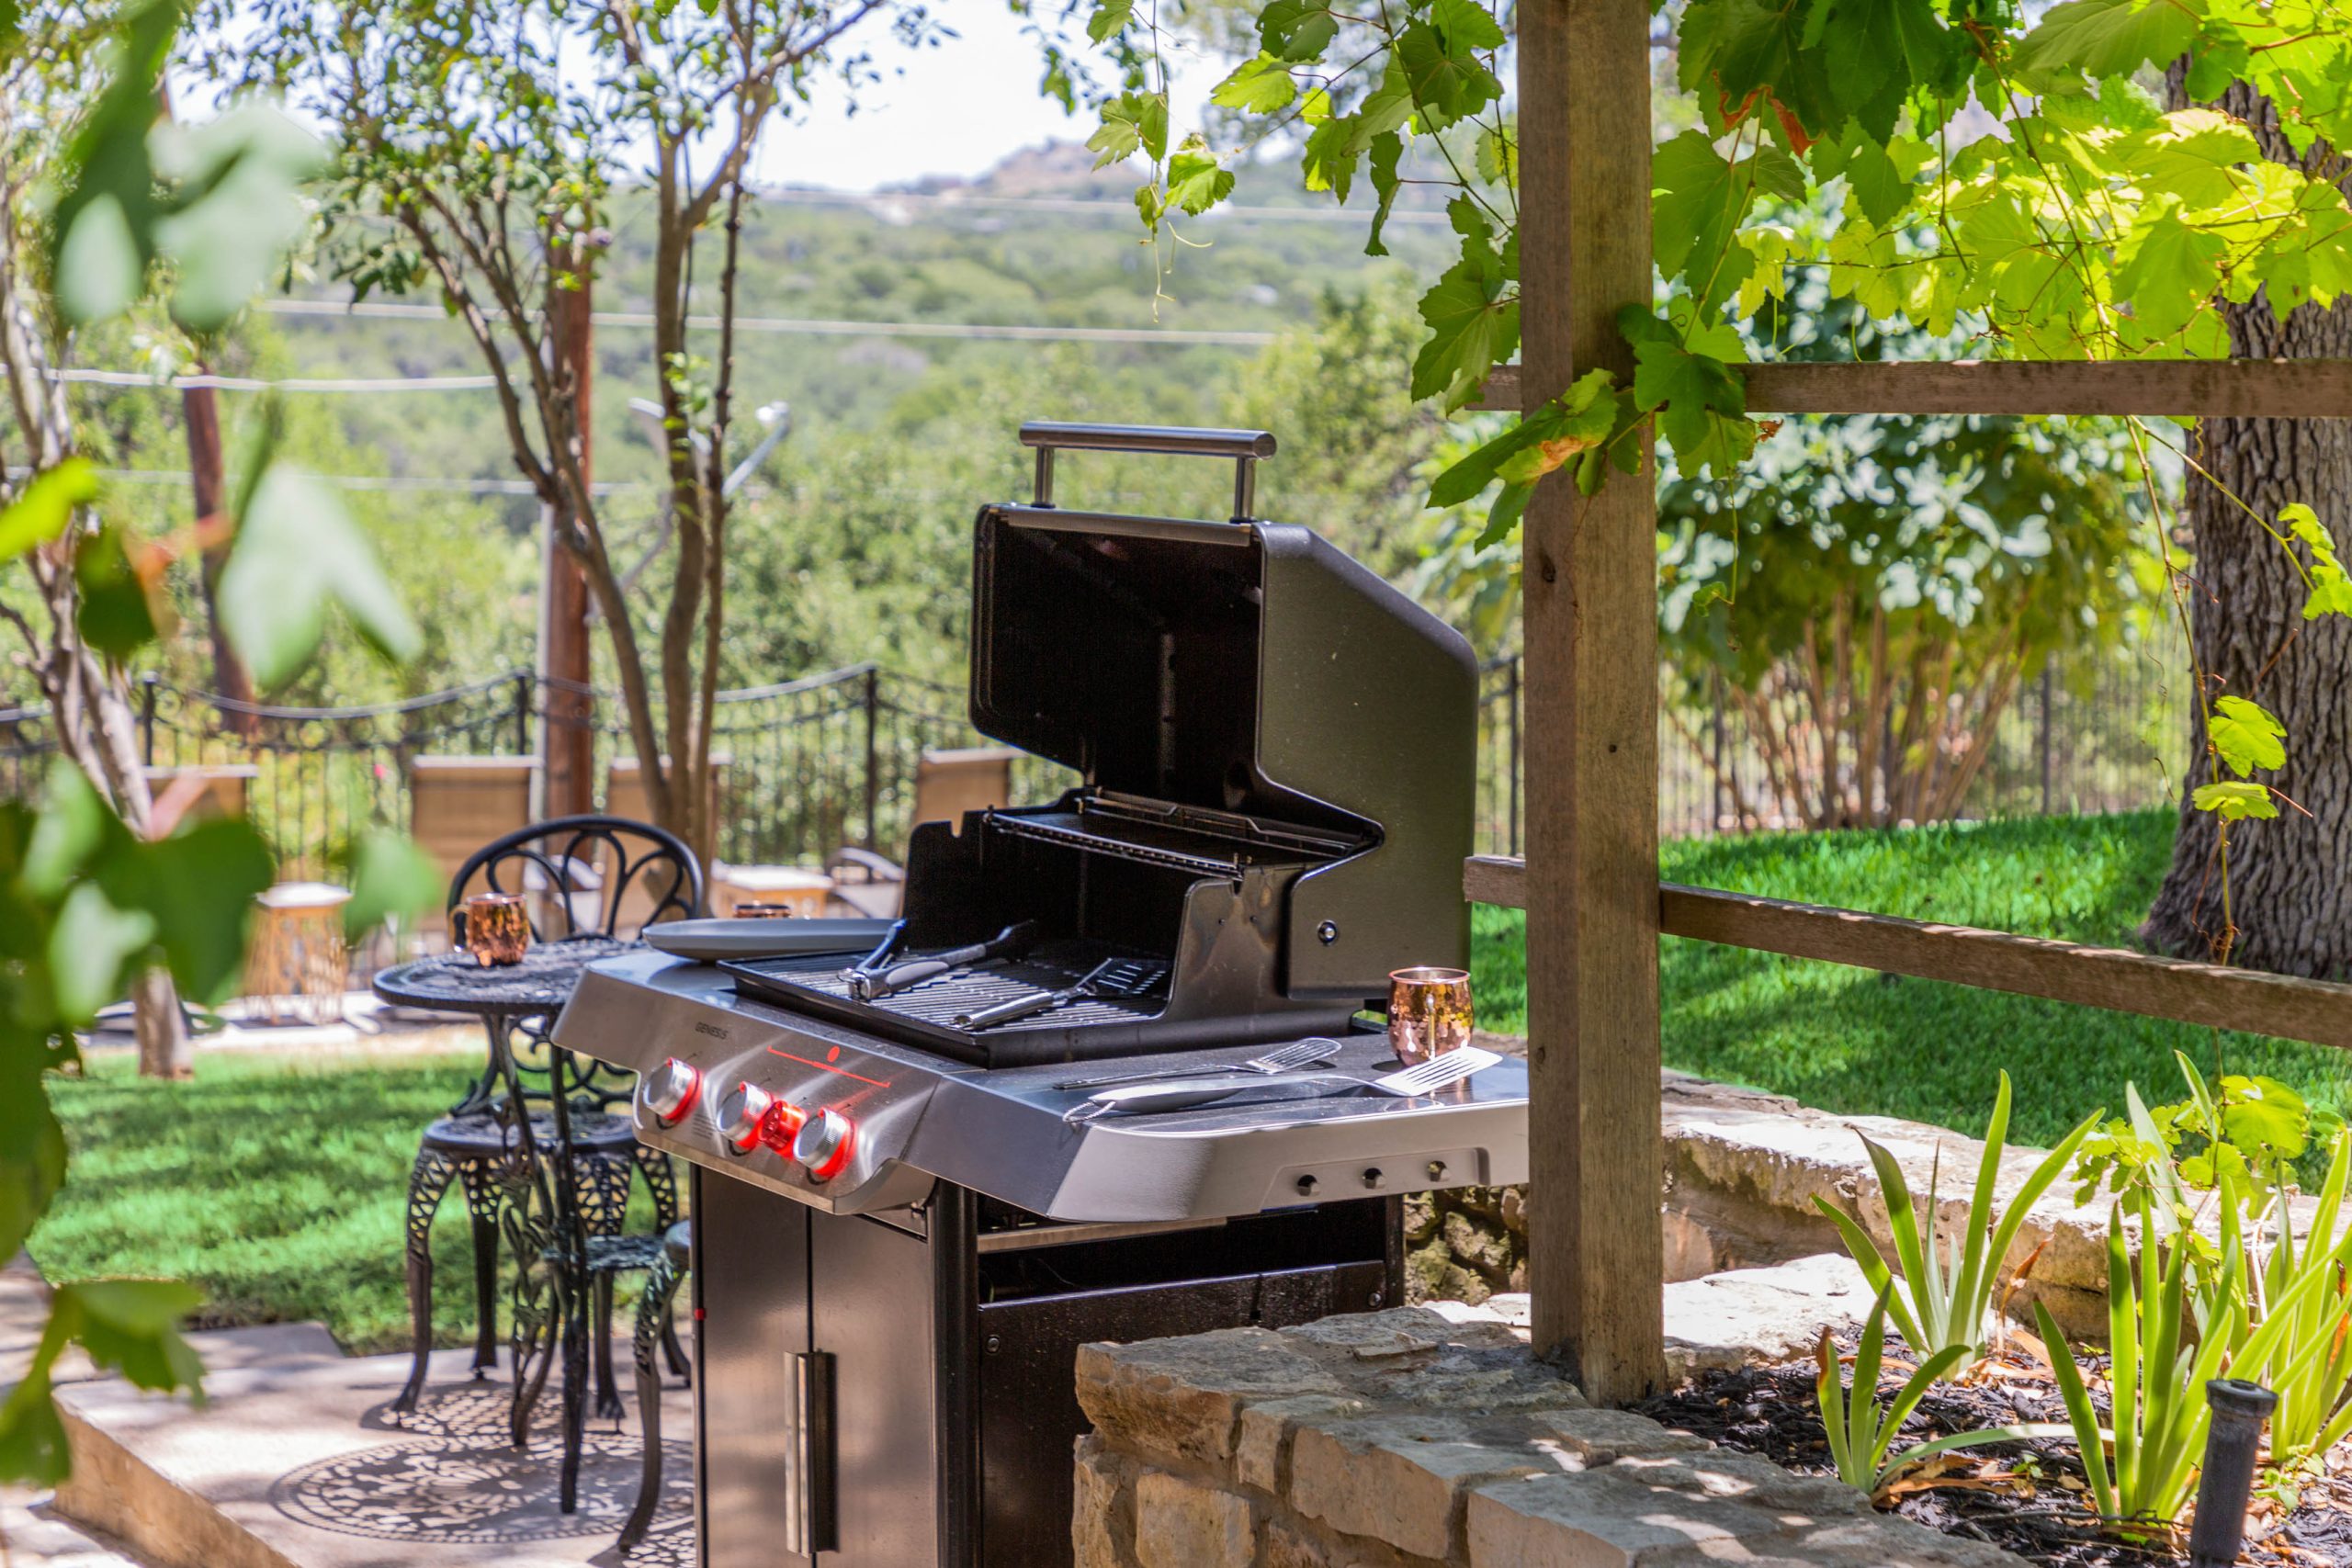 image of additional amenities including a barbecue pit and utensils